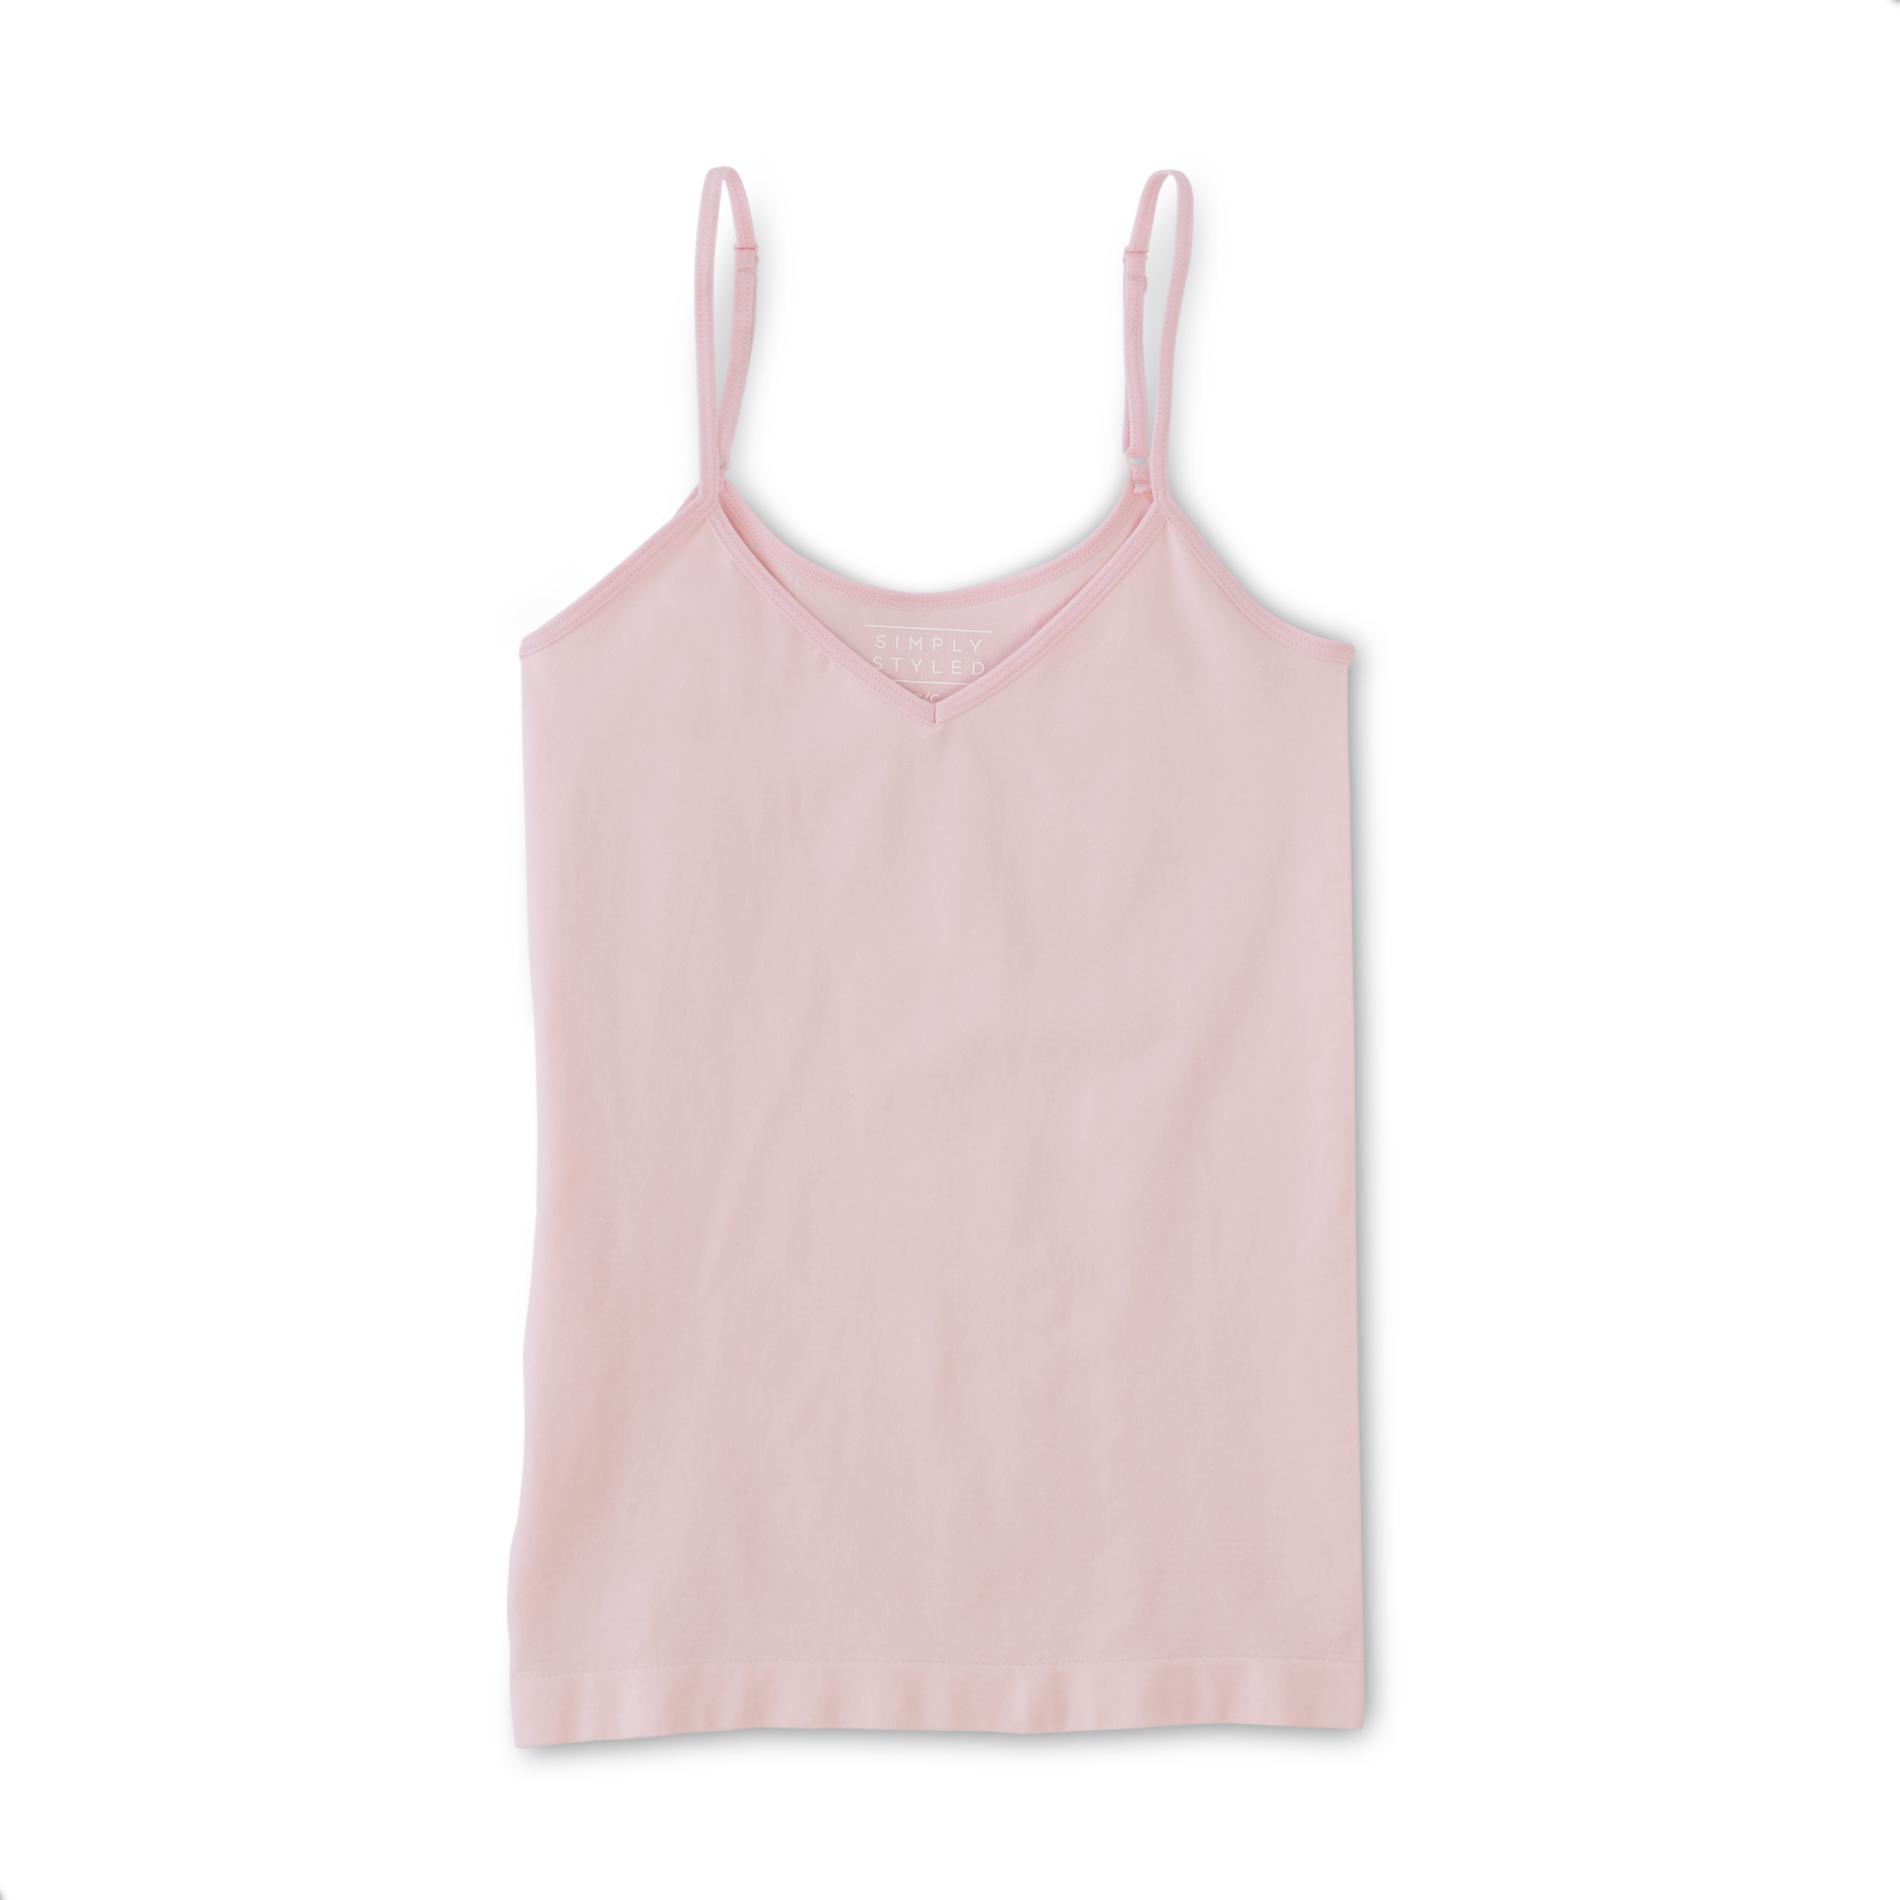 Simply Styled Women's Seamless Camisole